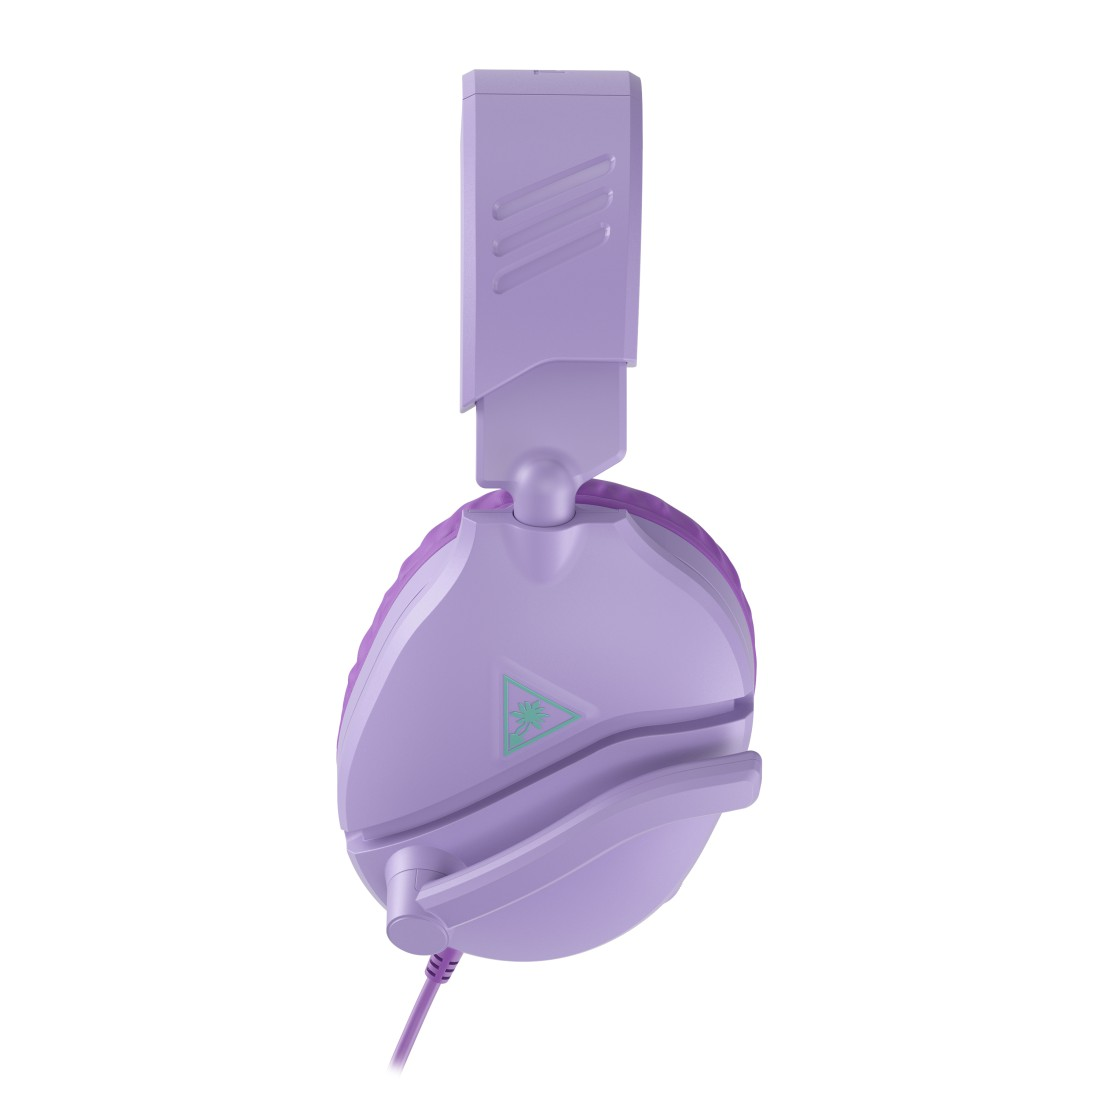 Headset Recon Over-ear 70, TBS-6560-05 Lila Over-Ear TURTLE Gaming BEACH